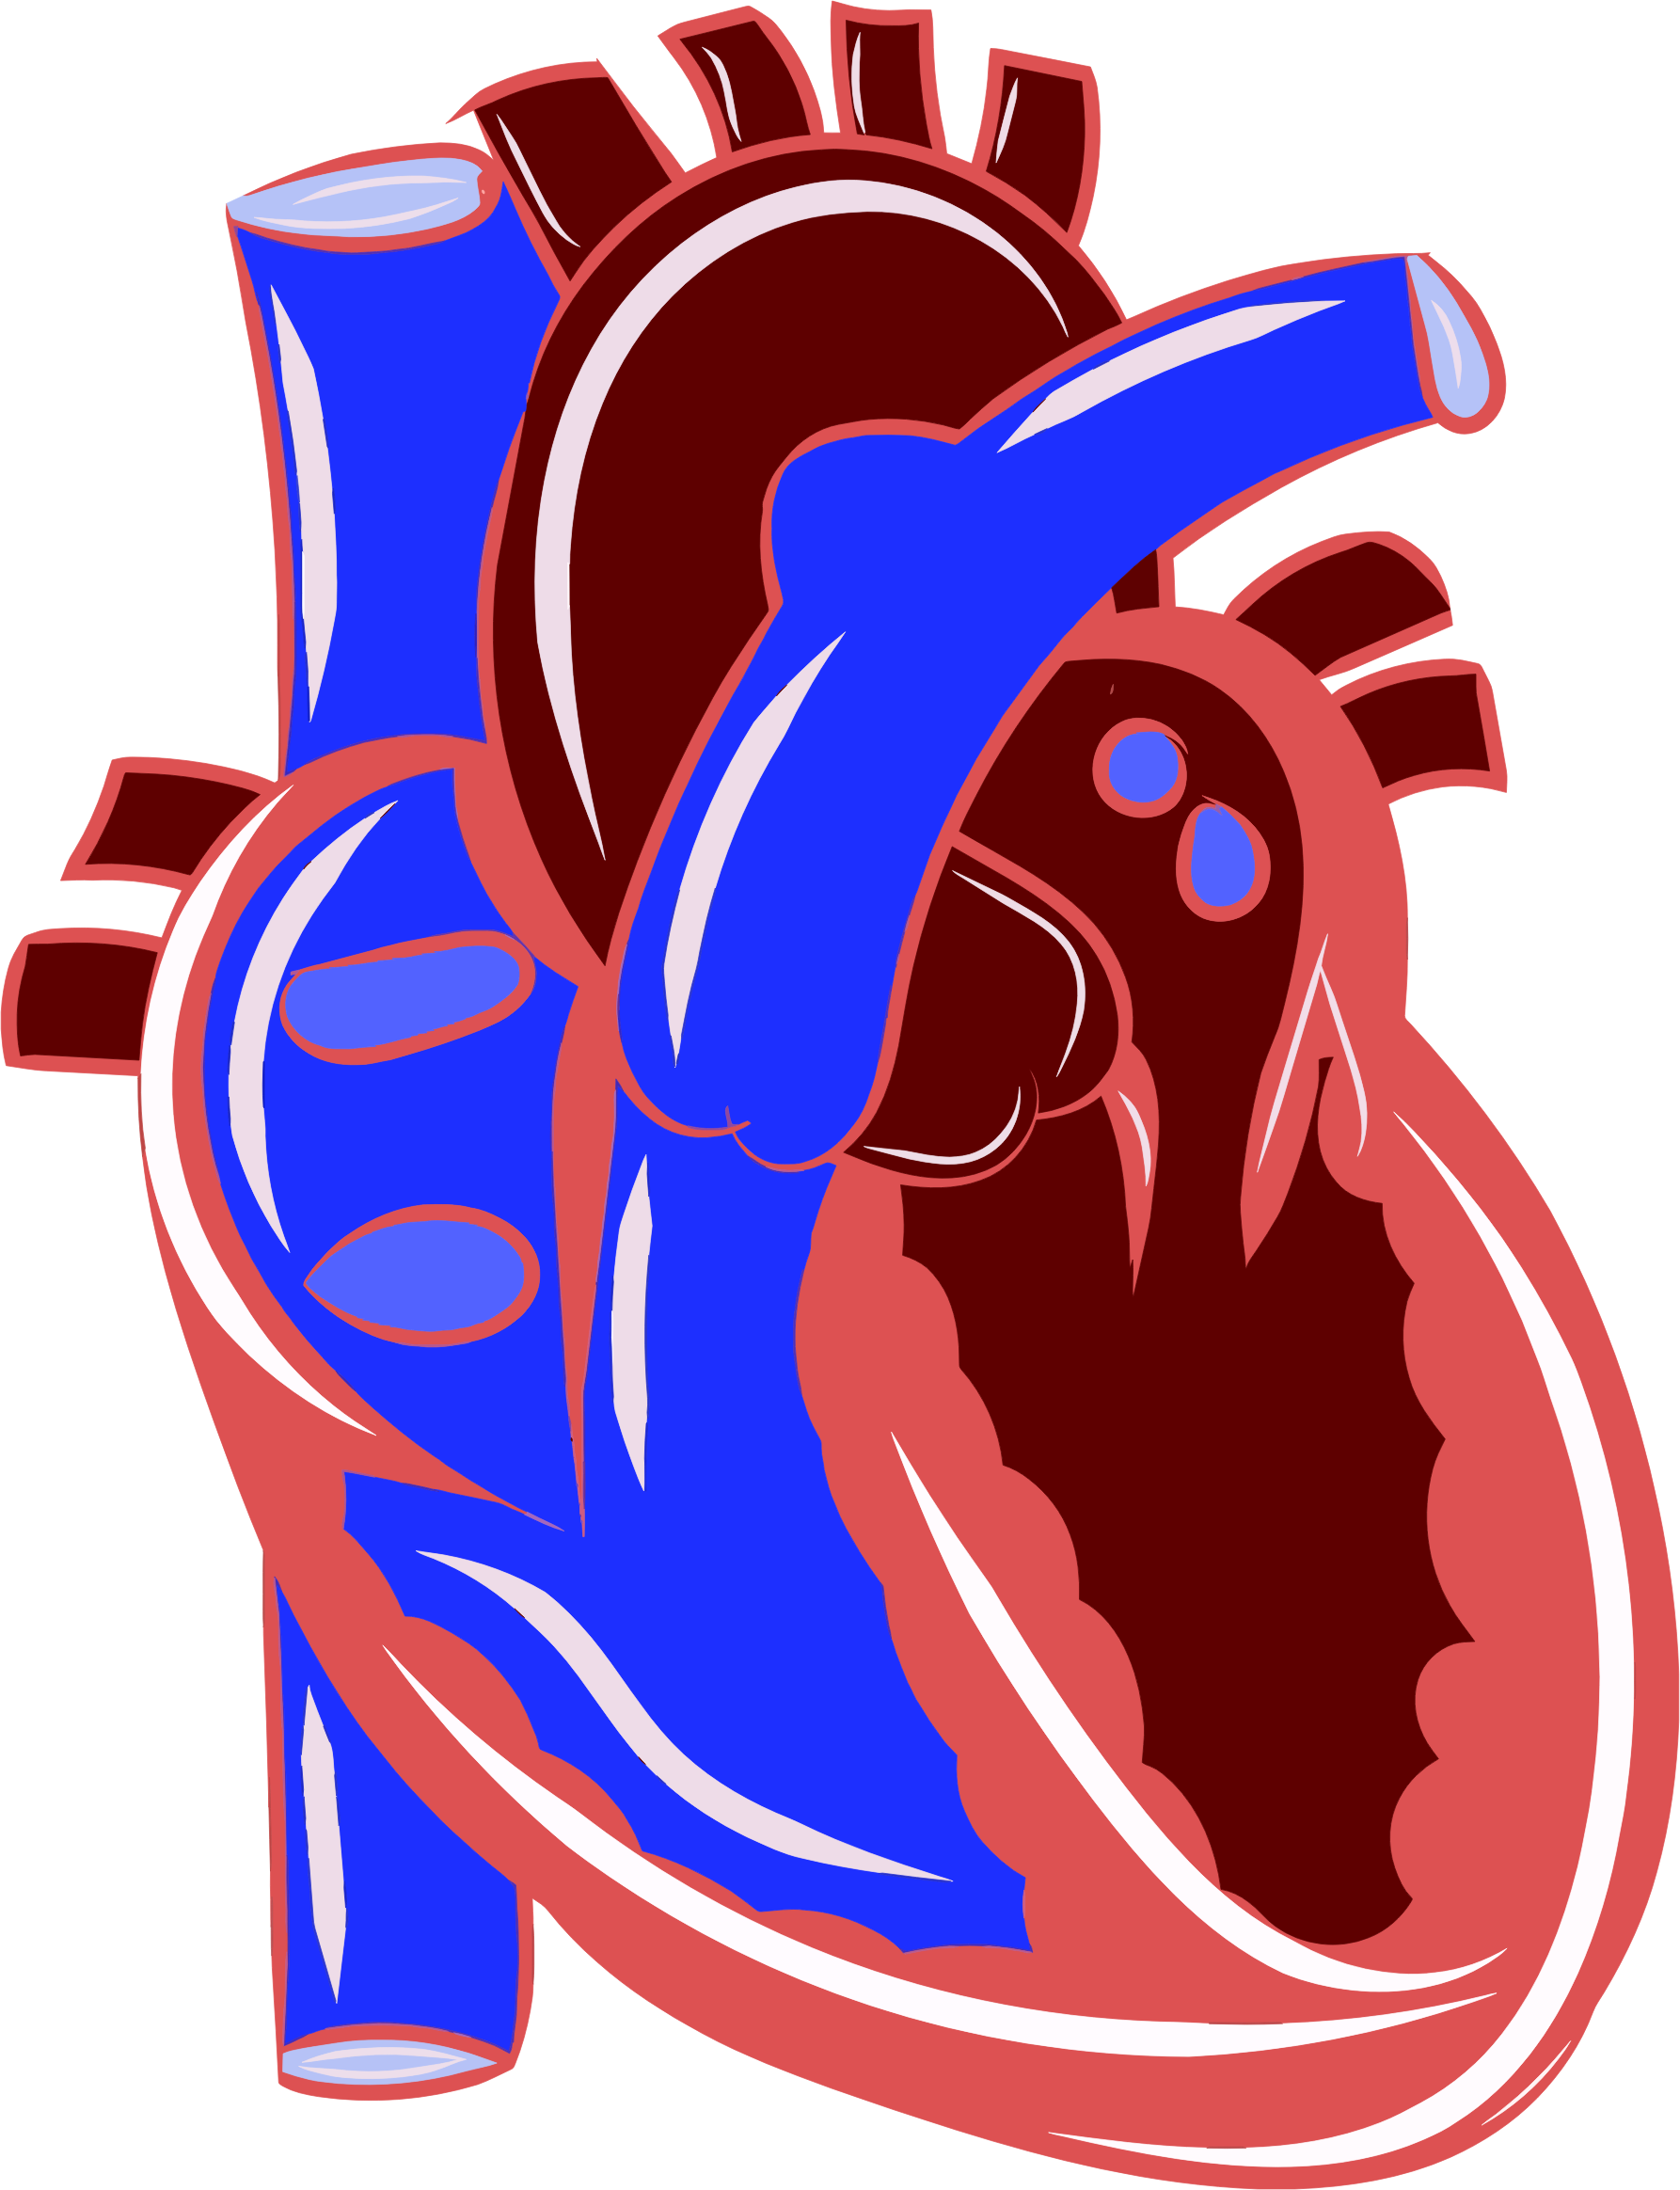 Clipart science colorful. Realistic heart illustration big